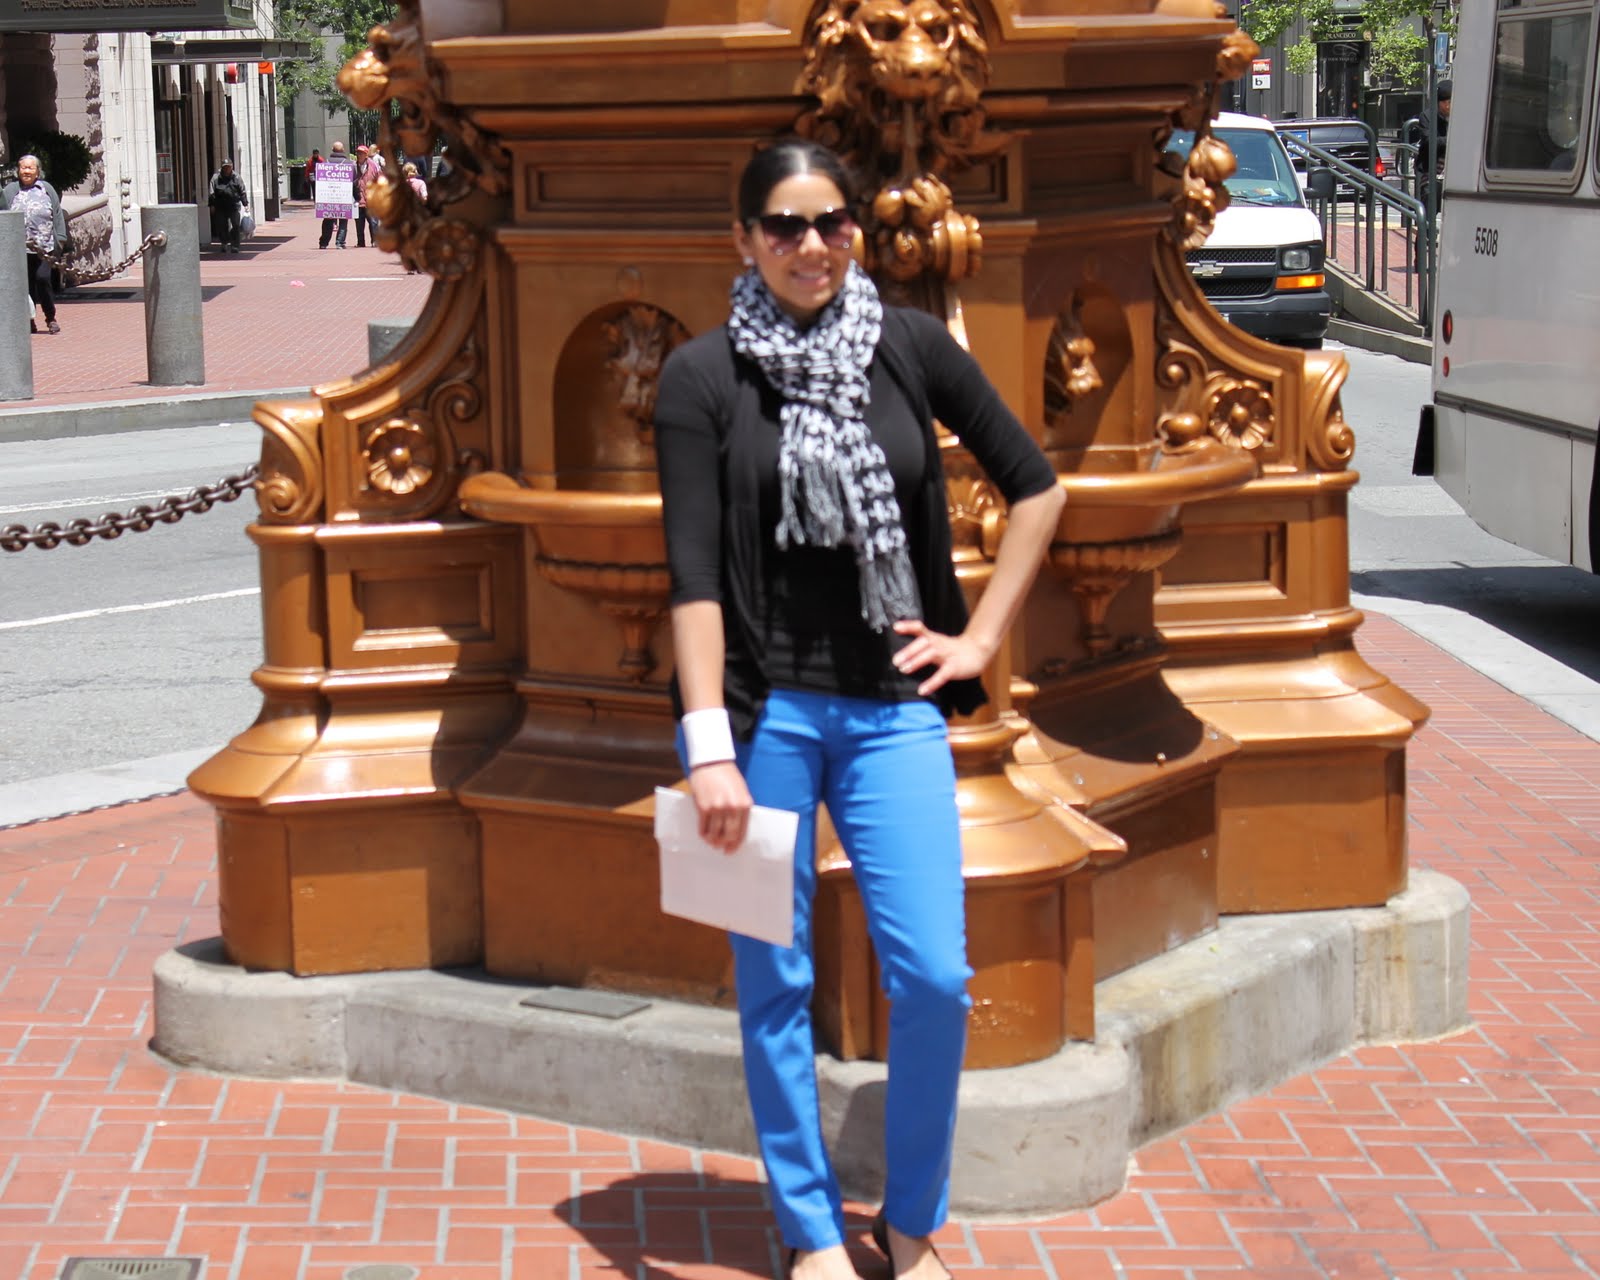 San Francisco Part 3: Blue Colored Jeans in Union Square